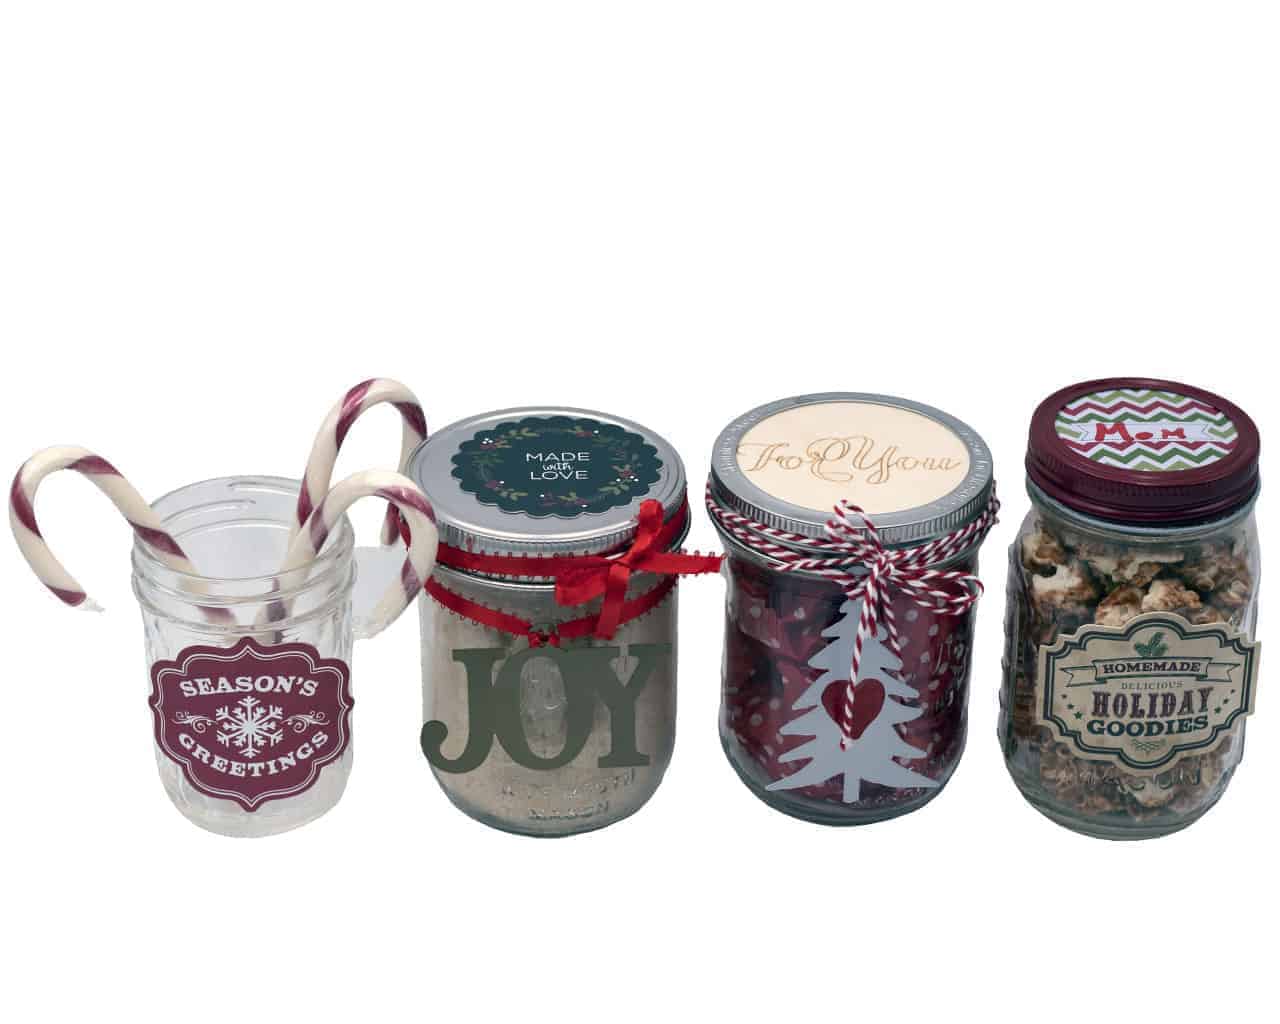 jar-jewelry-christmas-lids-inserts-metal-tags-labels-twine-mason-jars-decorated-gift--above-white